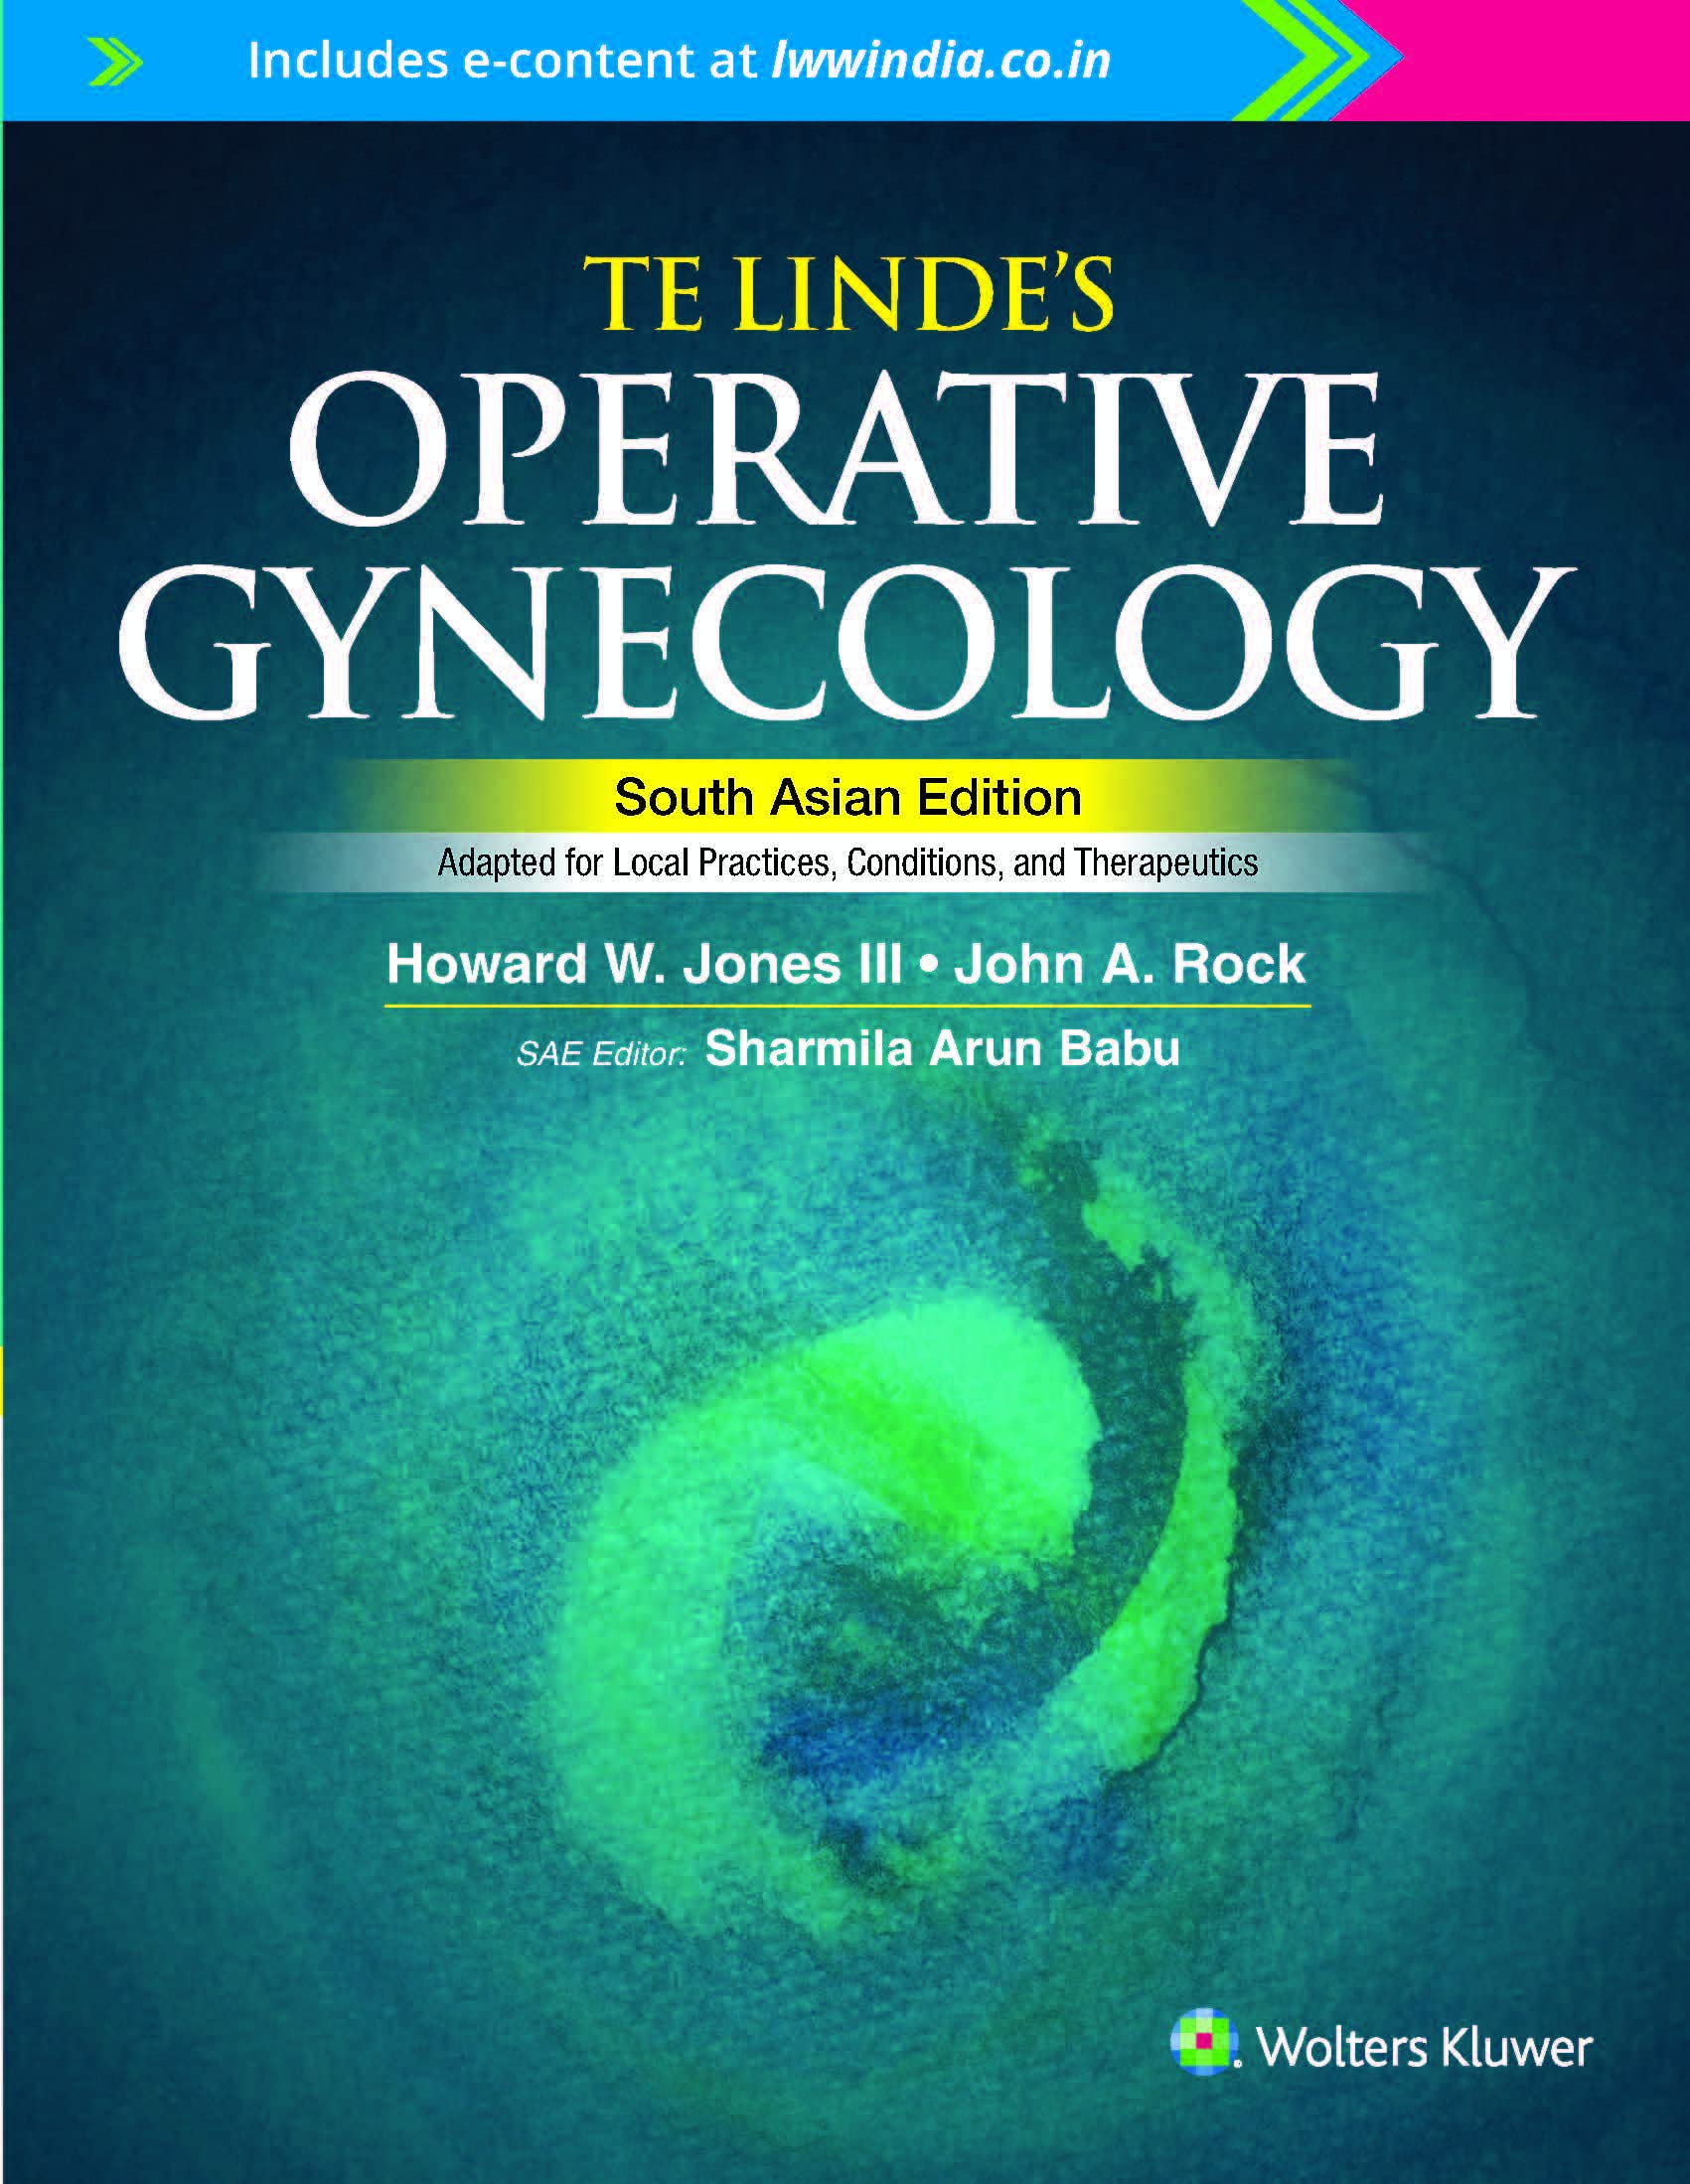 Te Linde’s Operative Gynecology, South Asian Edition